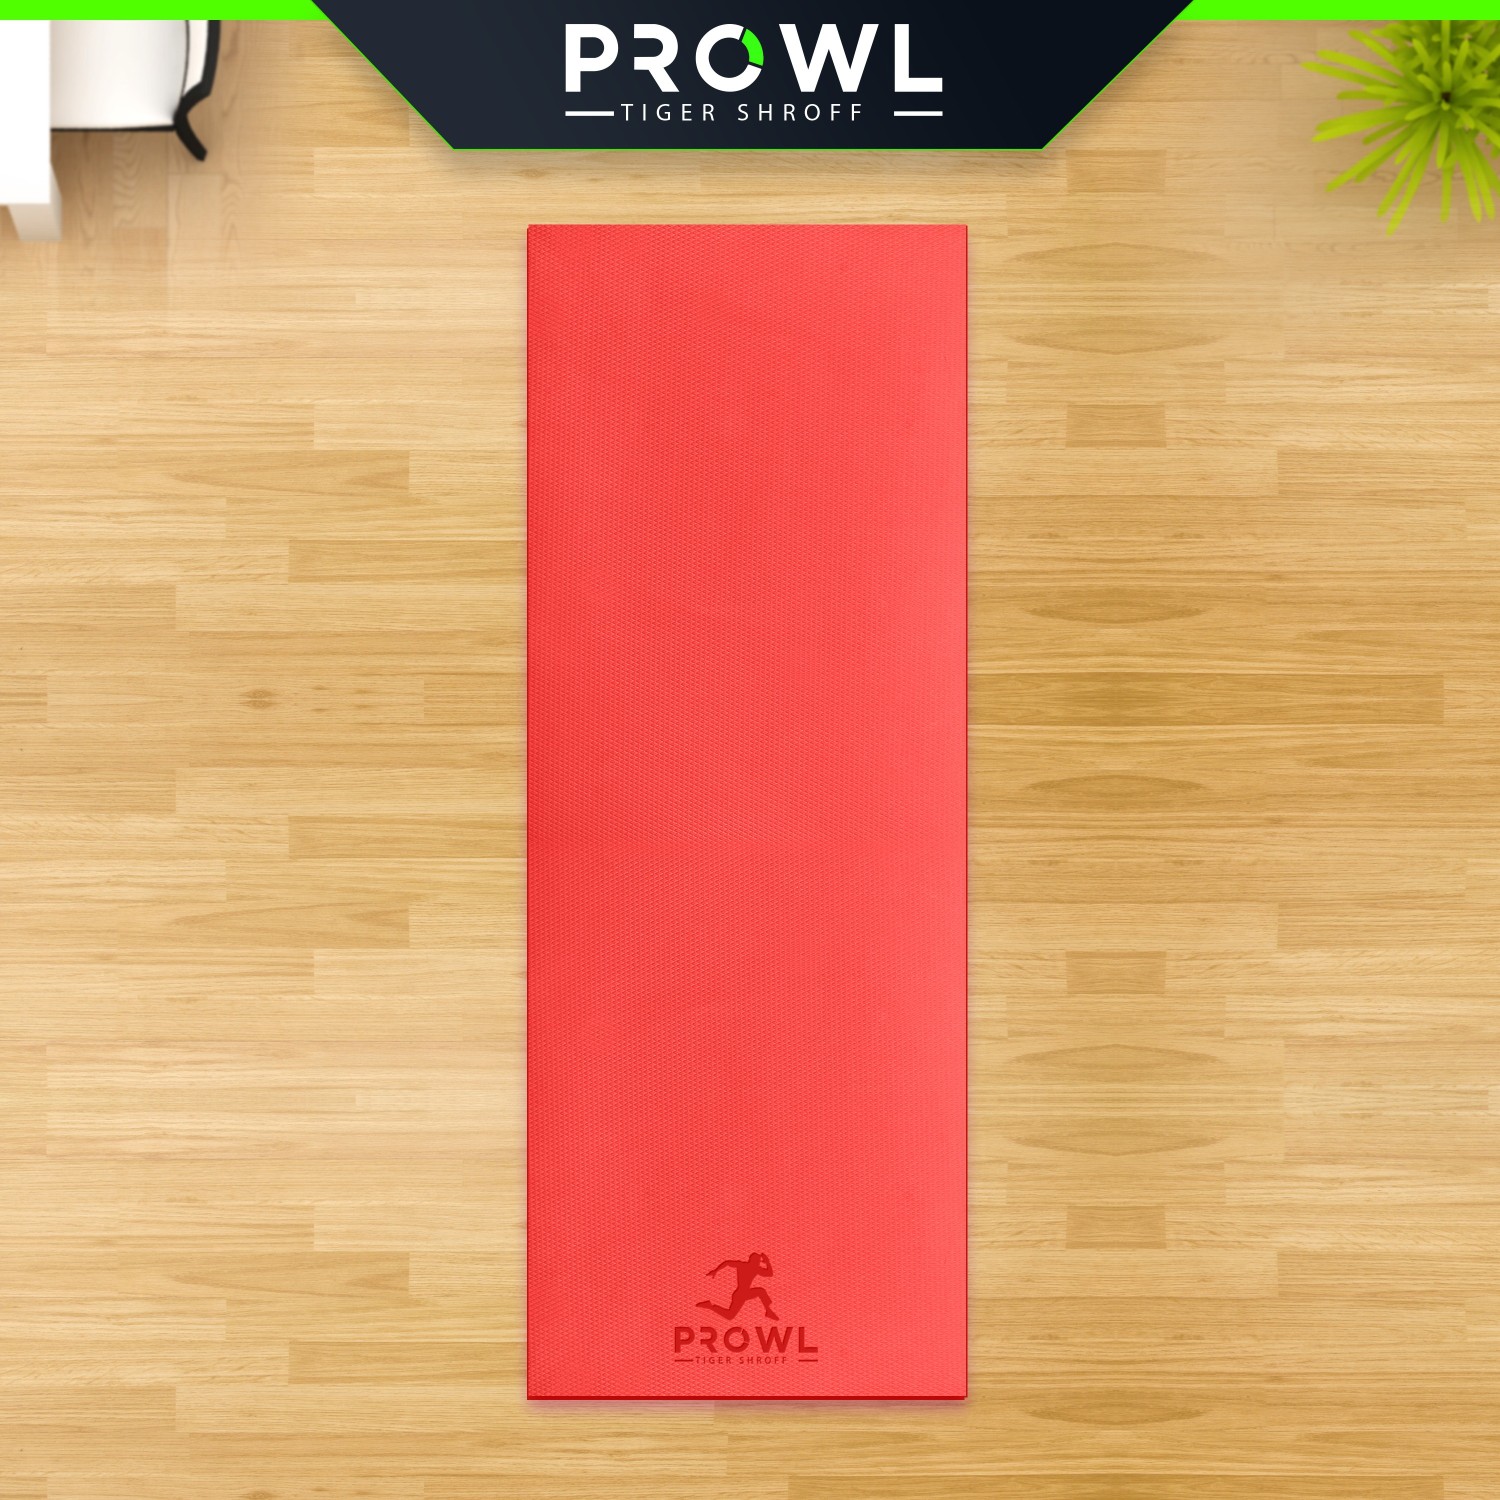 PROWL Non-Toxic Phthalate Free Anti-Skid with Bag 10 mm Yoga Mat - Price  History